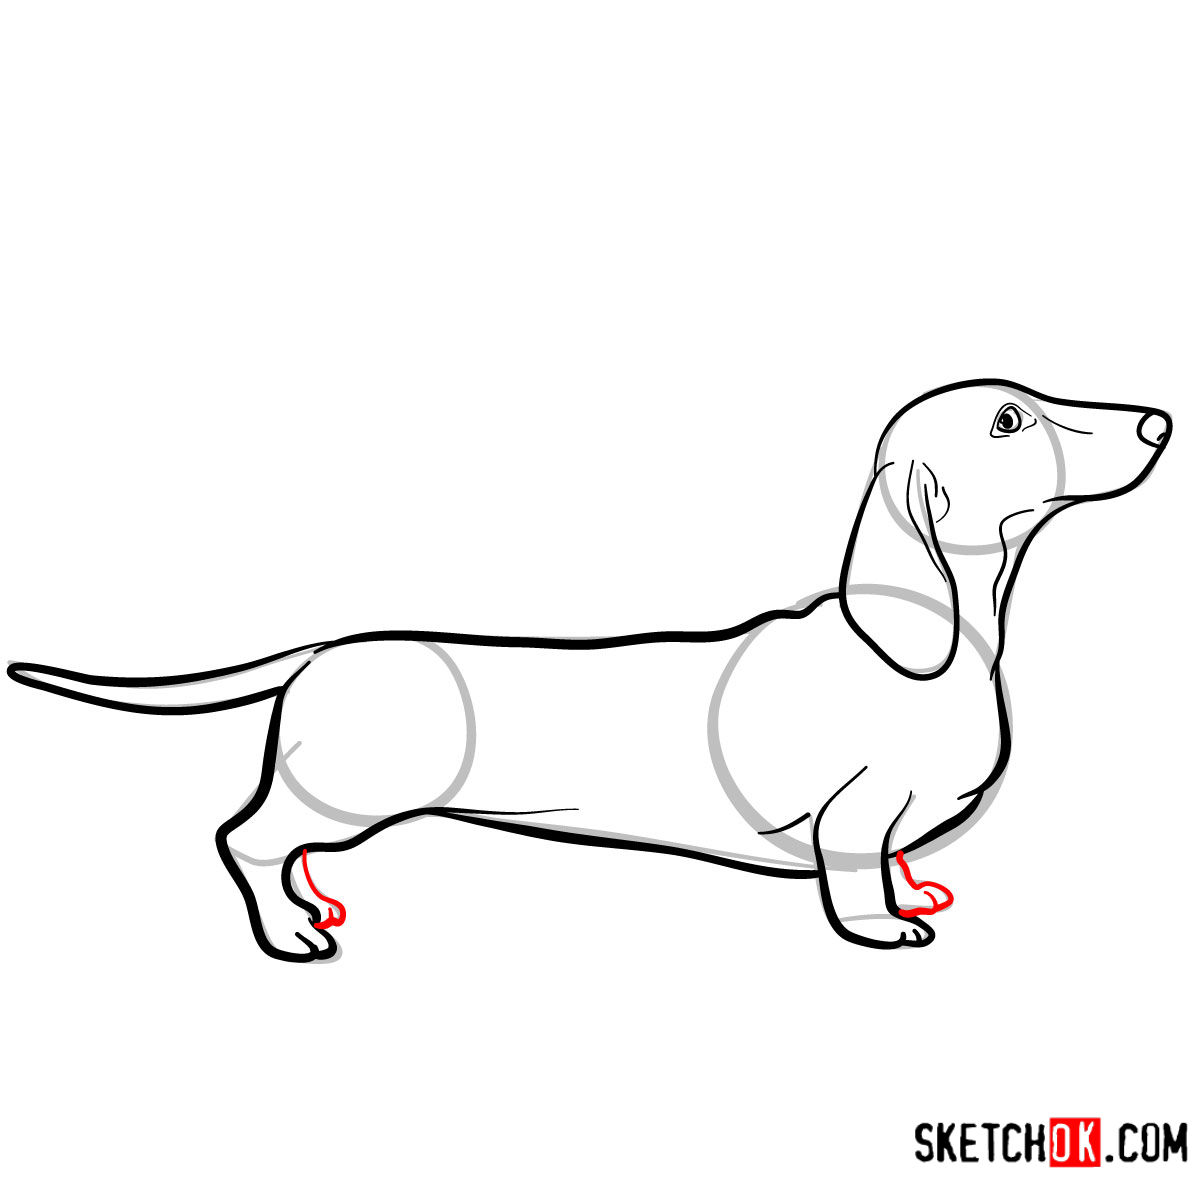 How to draw the Dachshund dog - step 08